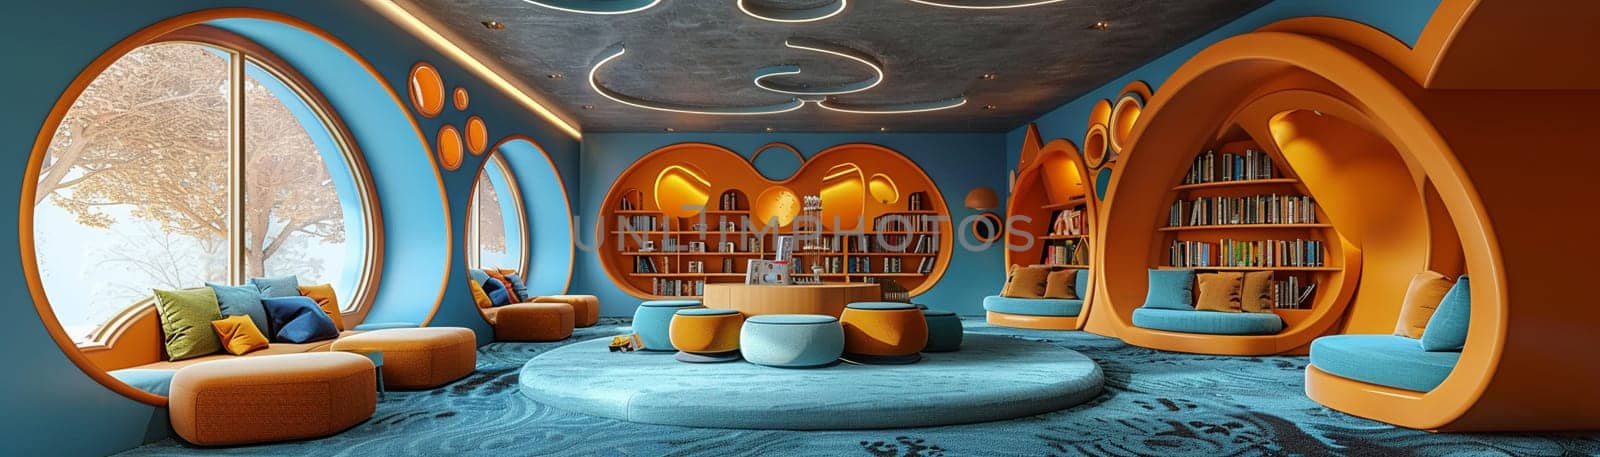 Interactive children's library with themed reading nooks and educational games.3D render